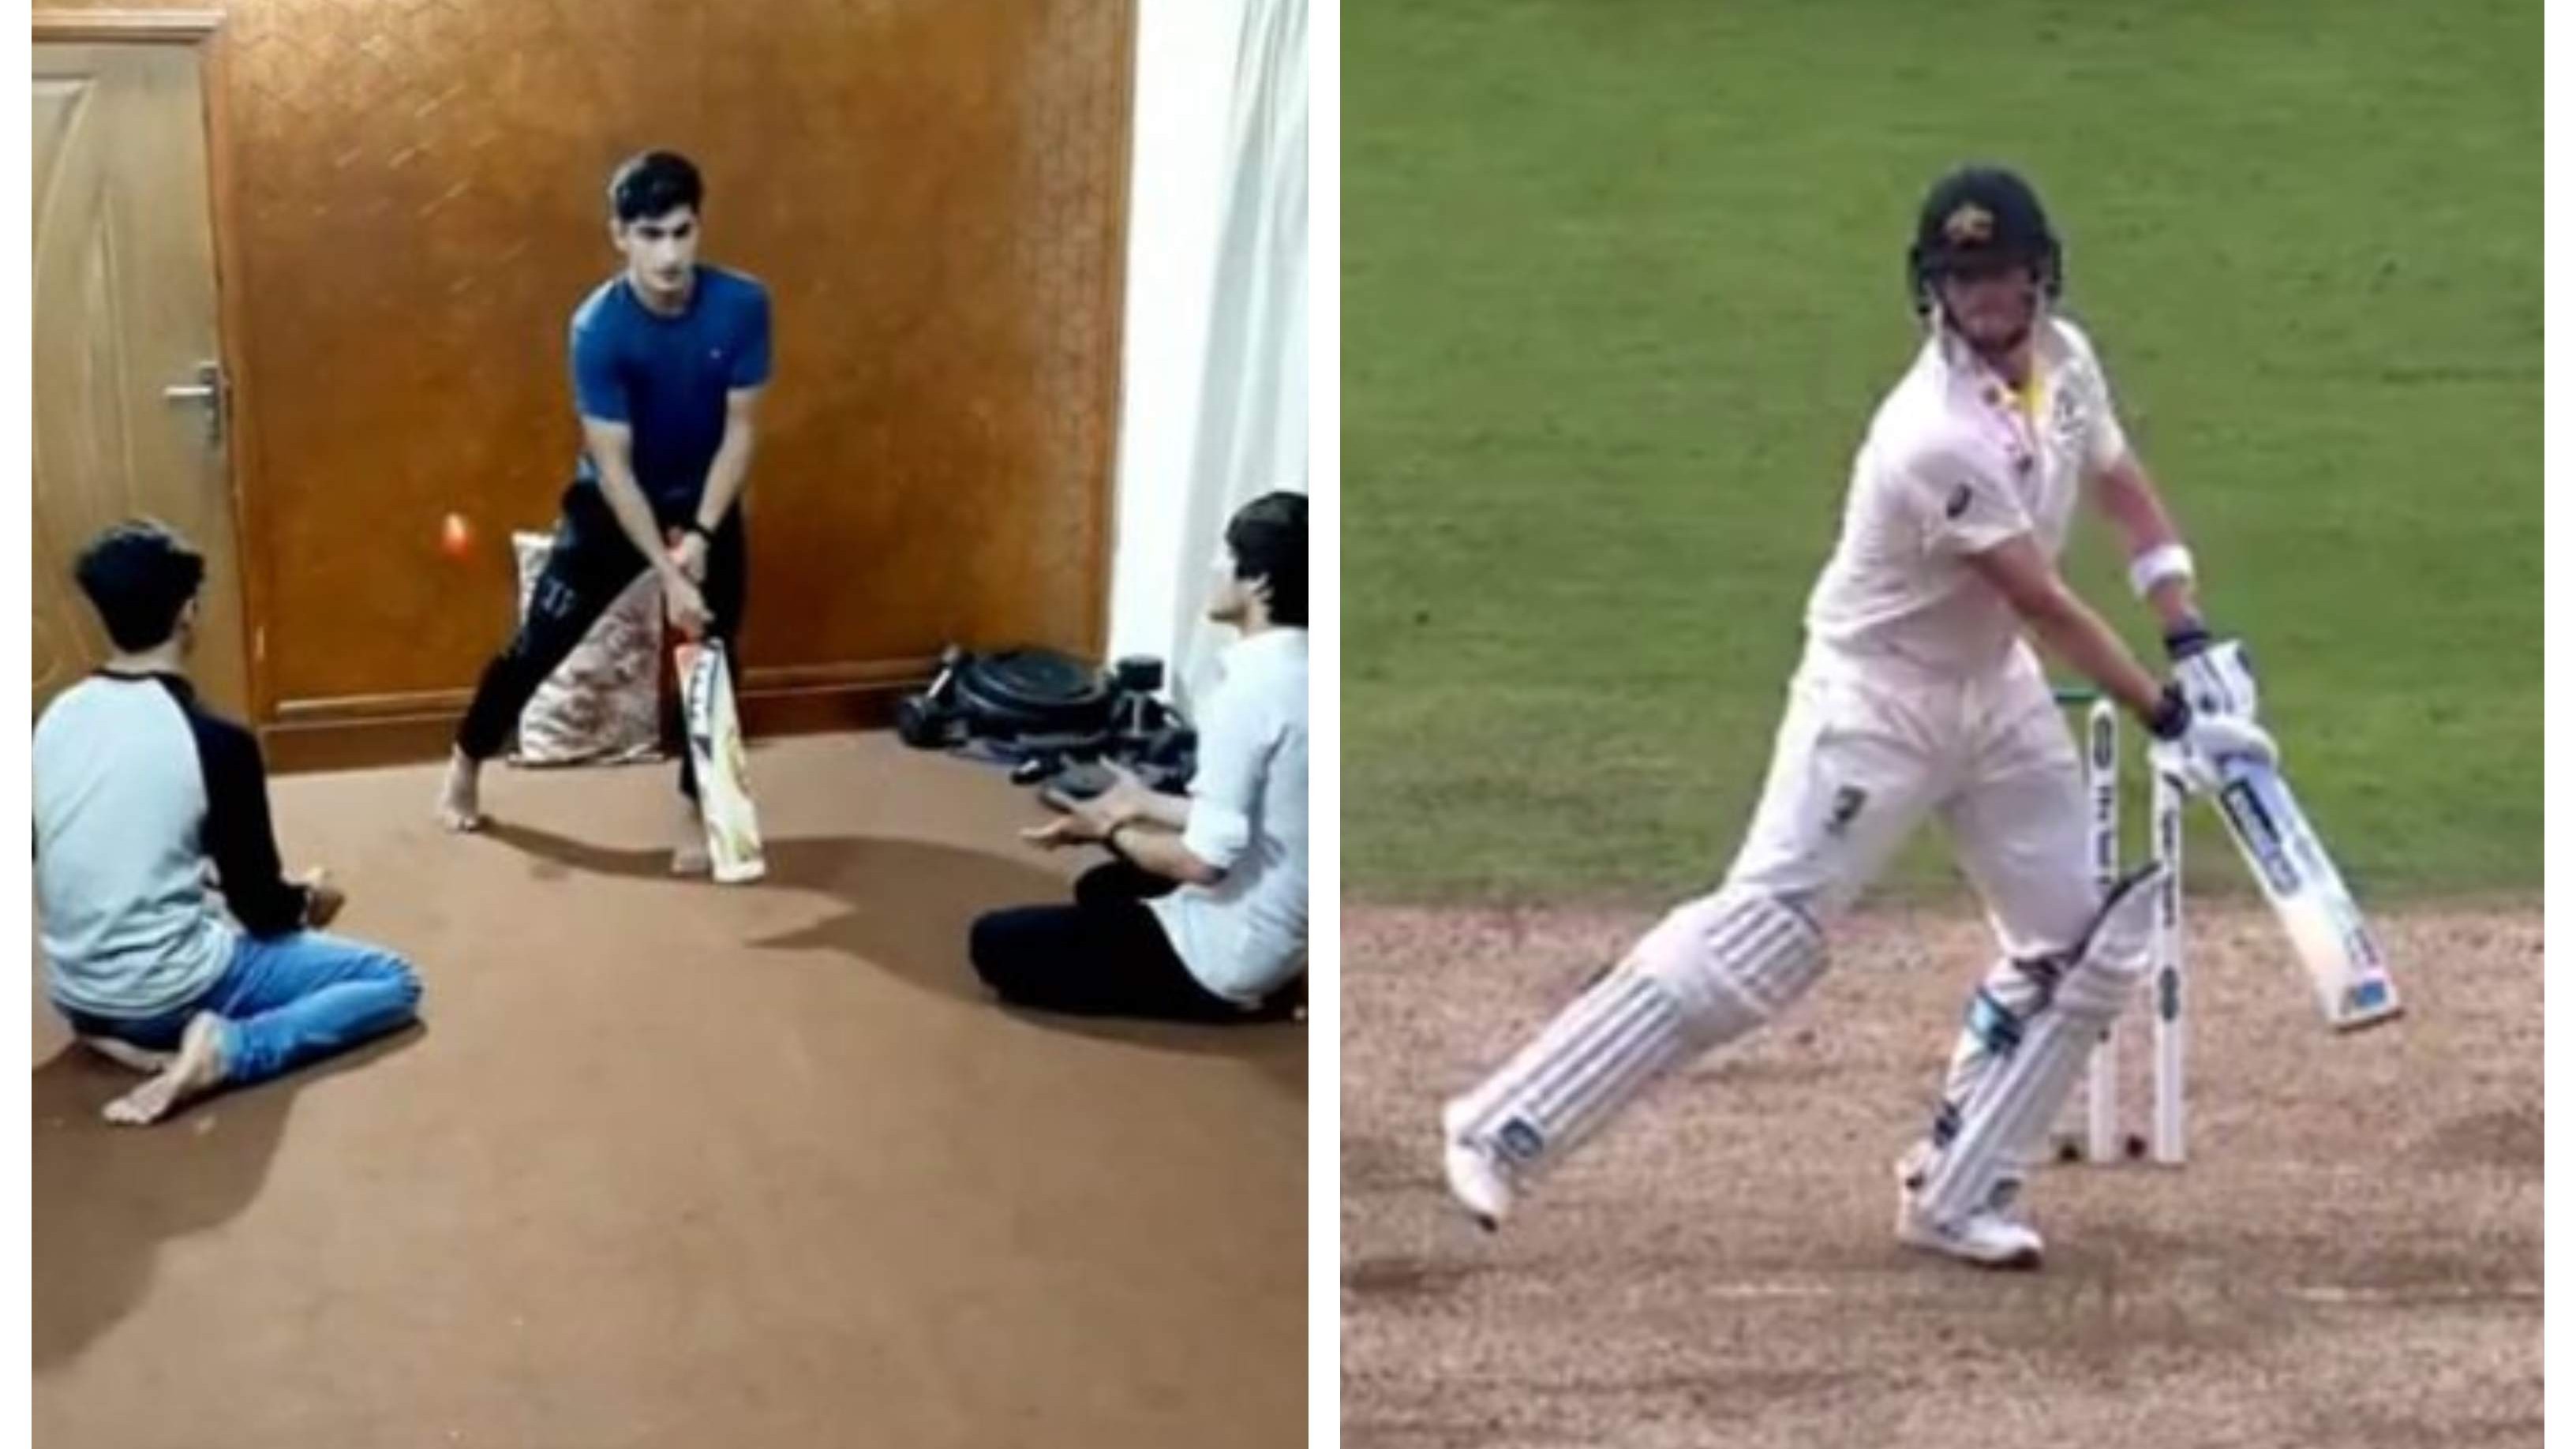 WATCH: Naseem Shah imitates Steve Smith’s trademark leave while playing Indoor cricket